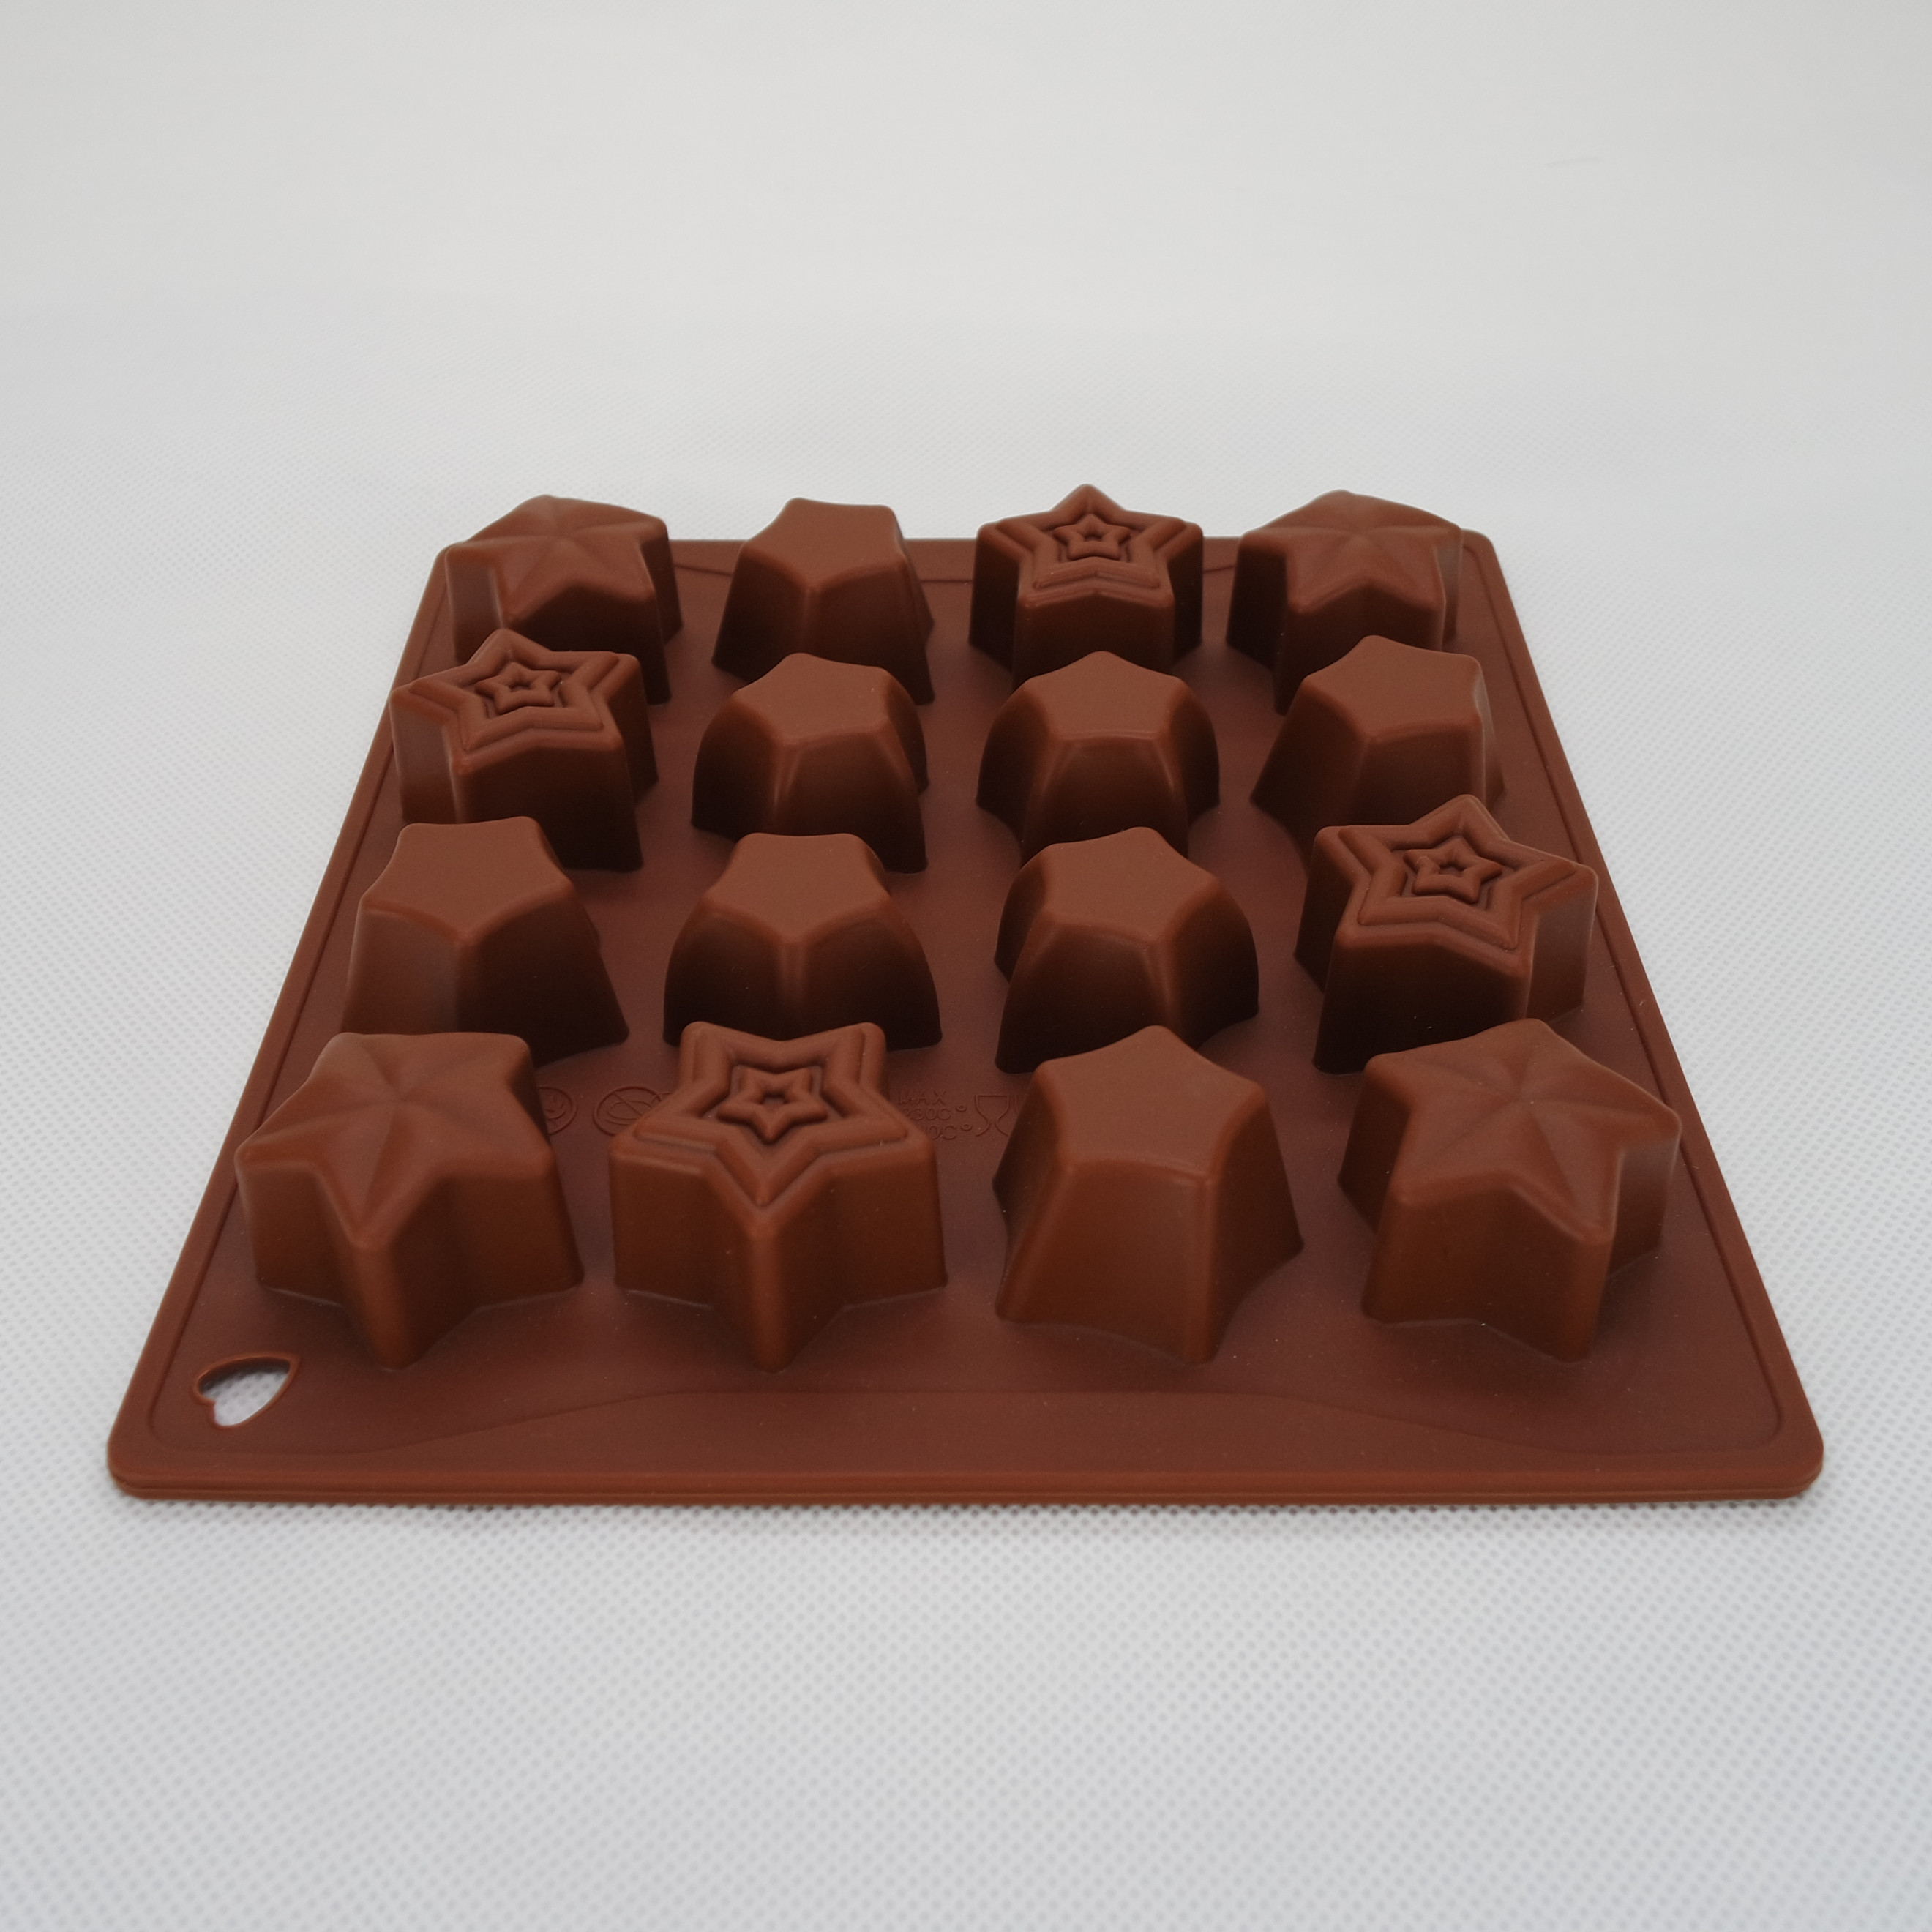 CXCH-014	Silicone Bakeware Chocolate Mould 16-Cup